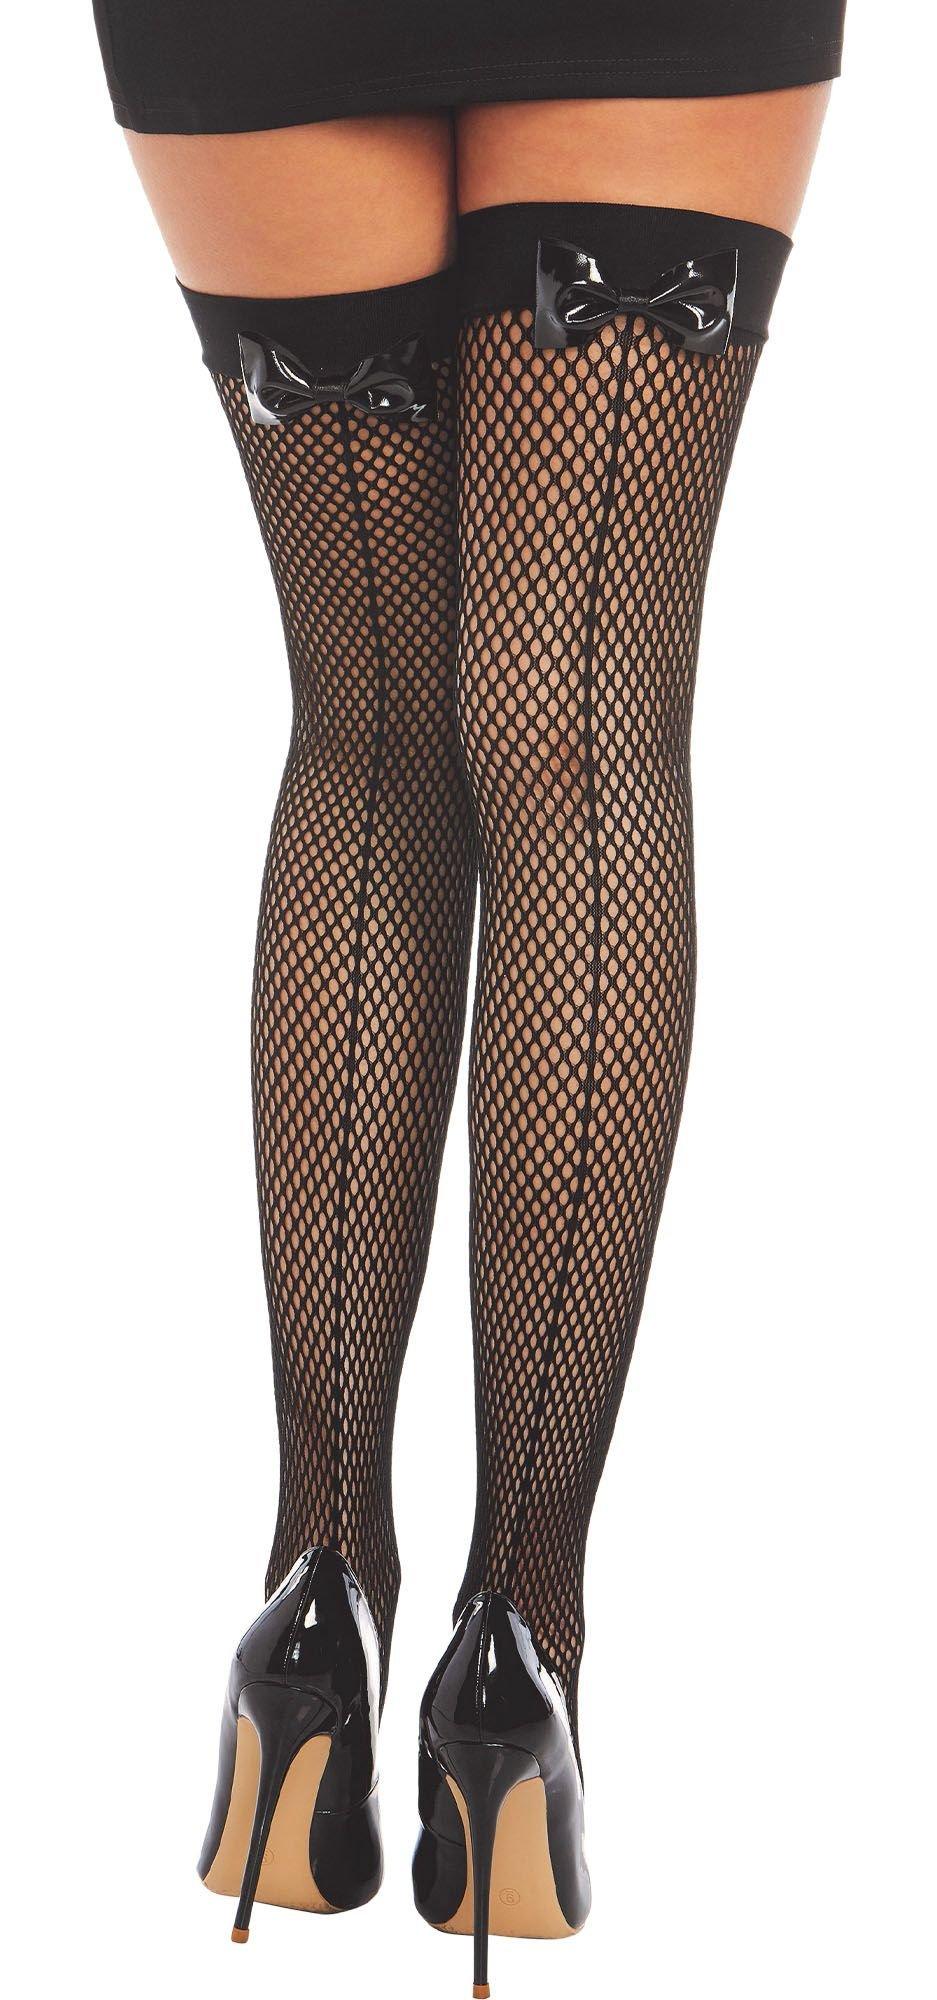 Leggings - Black Lace with Diamond on Knees – Hollywood Costumes